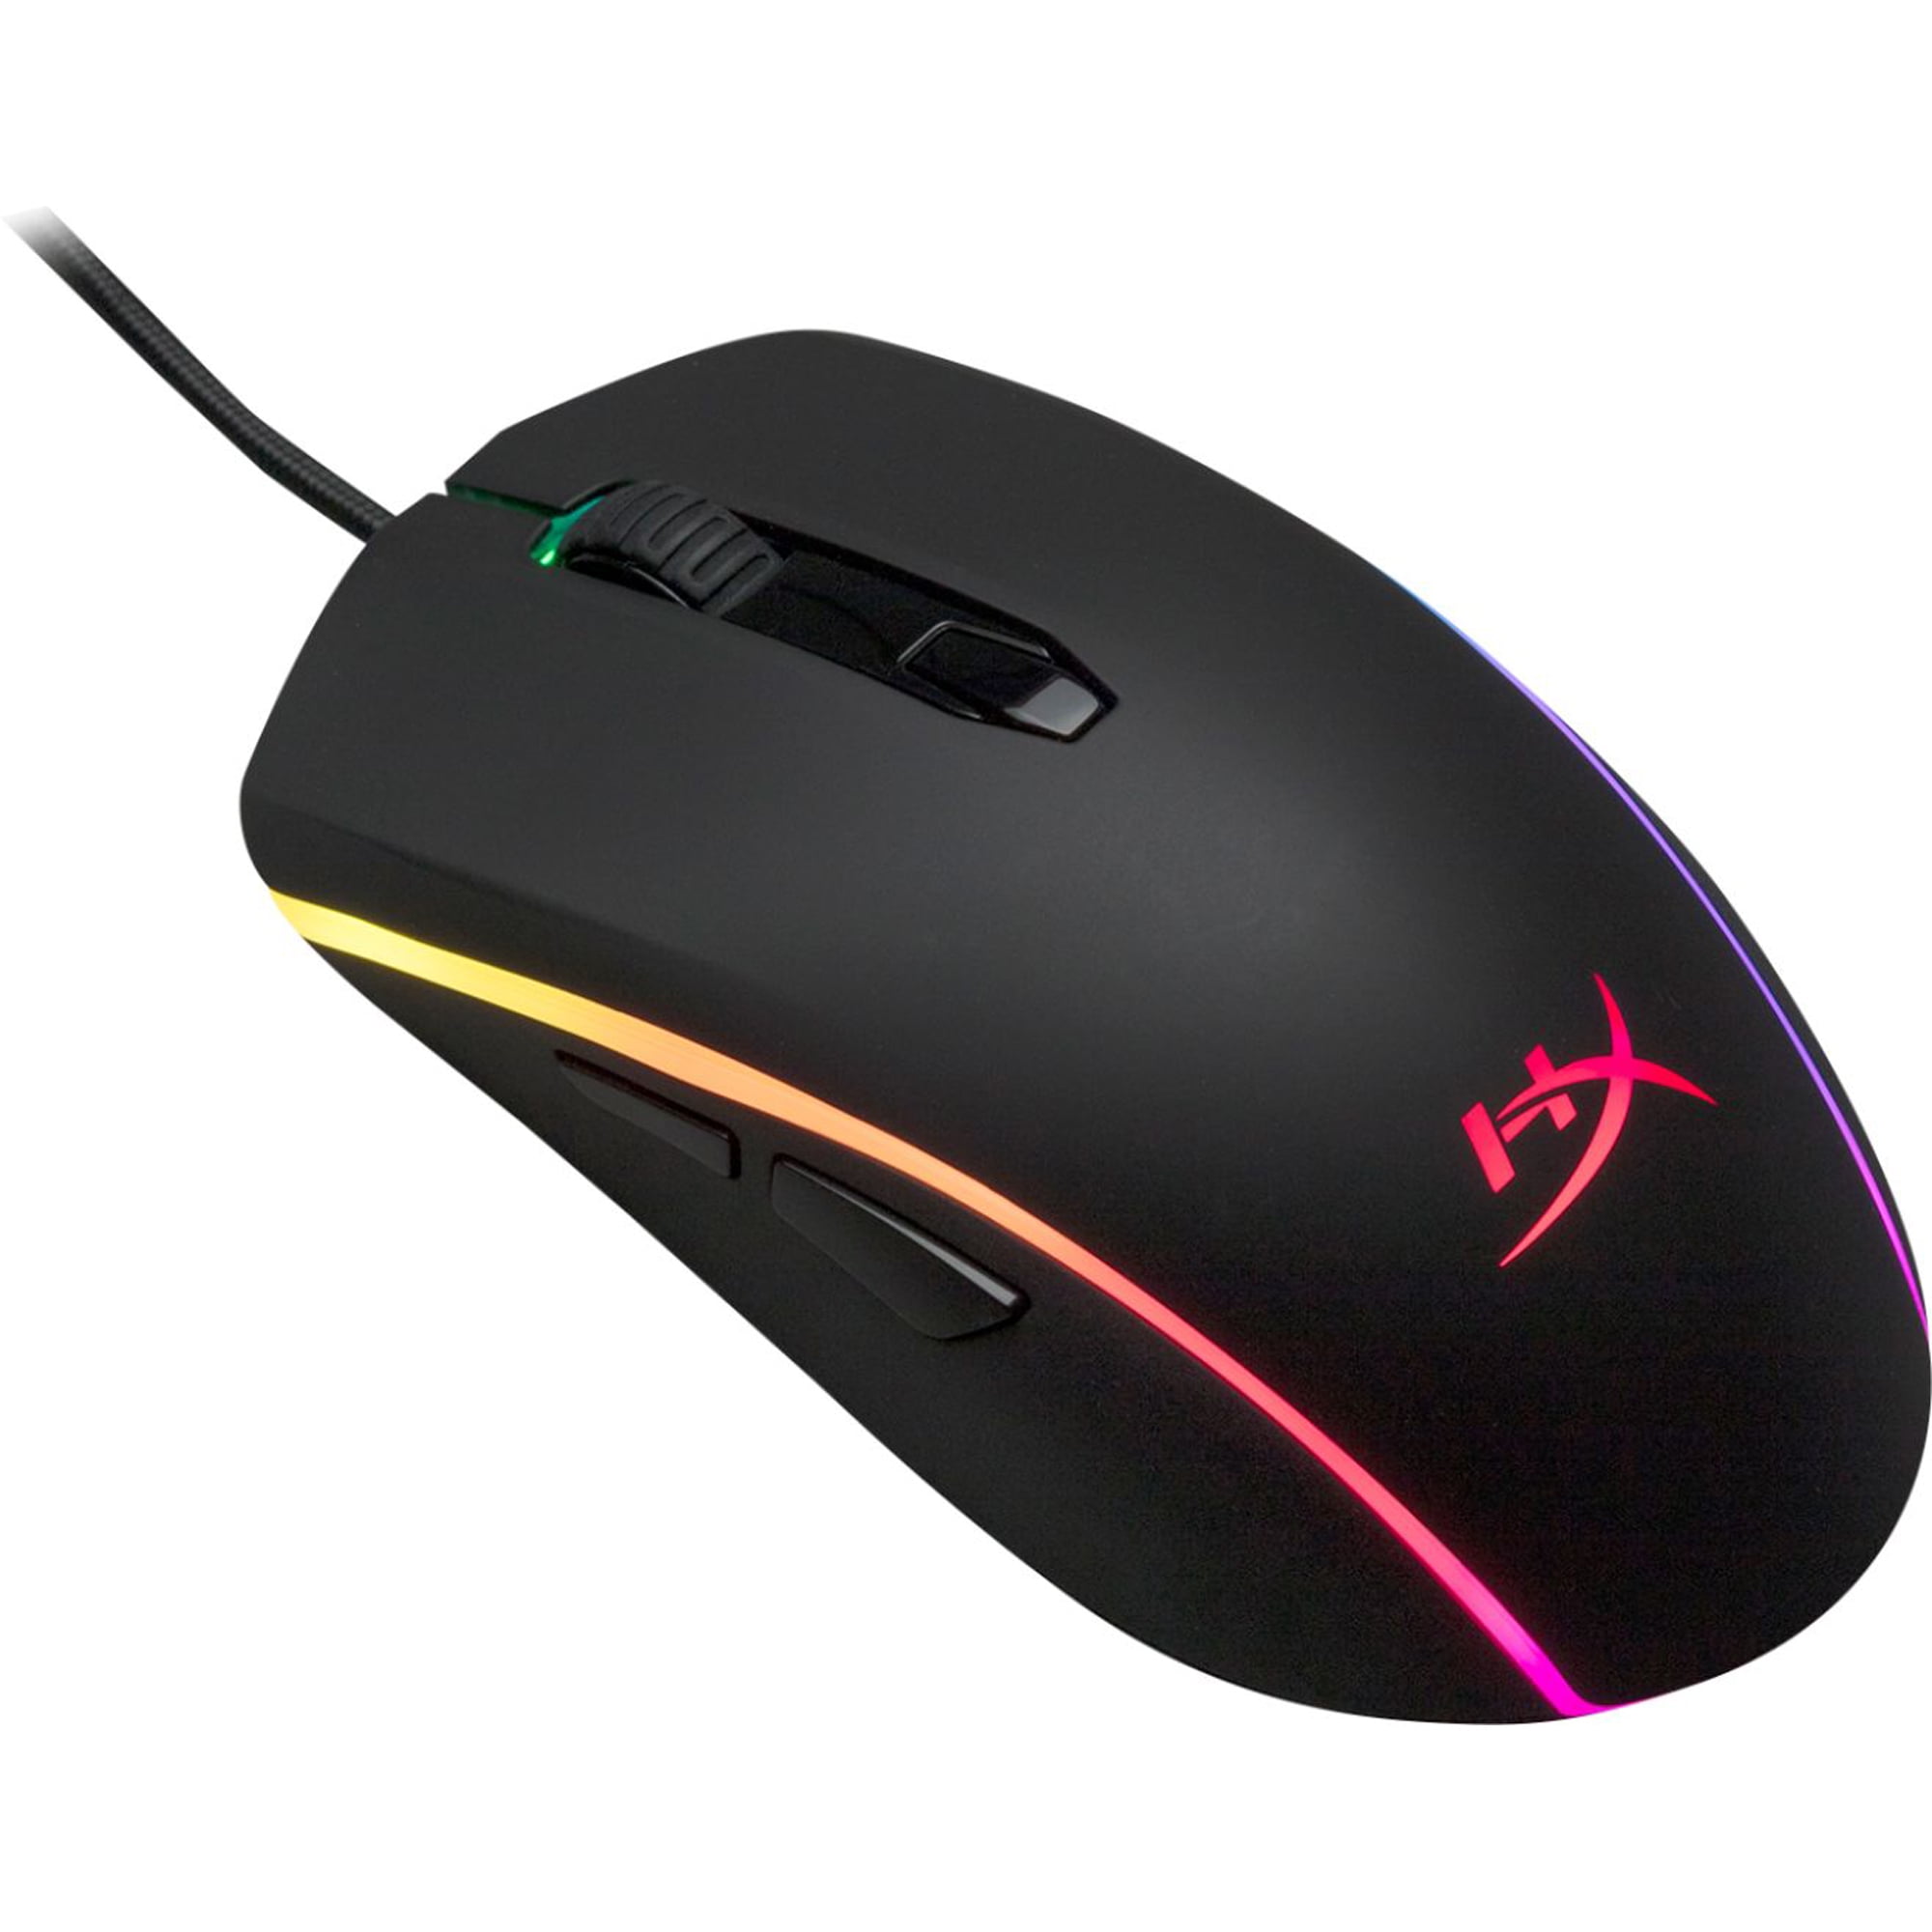 HyperX Pulsefire Surge Wired Optical Gaming Mouse with RGB Lighting - Black